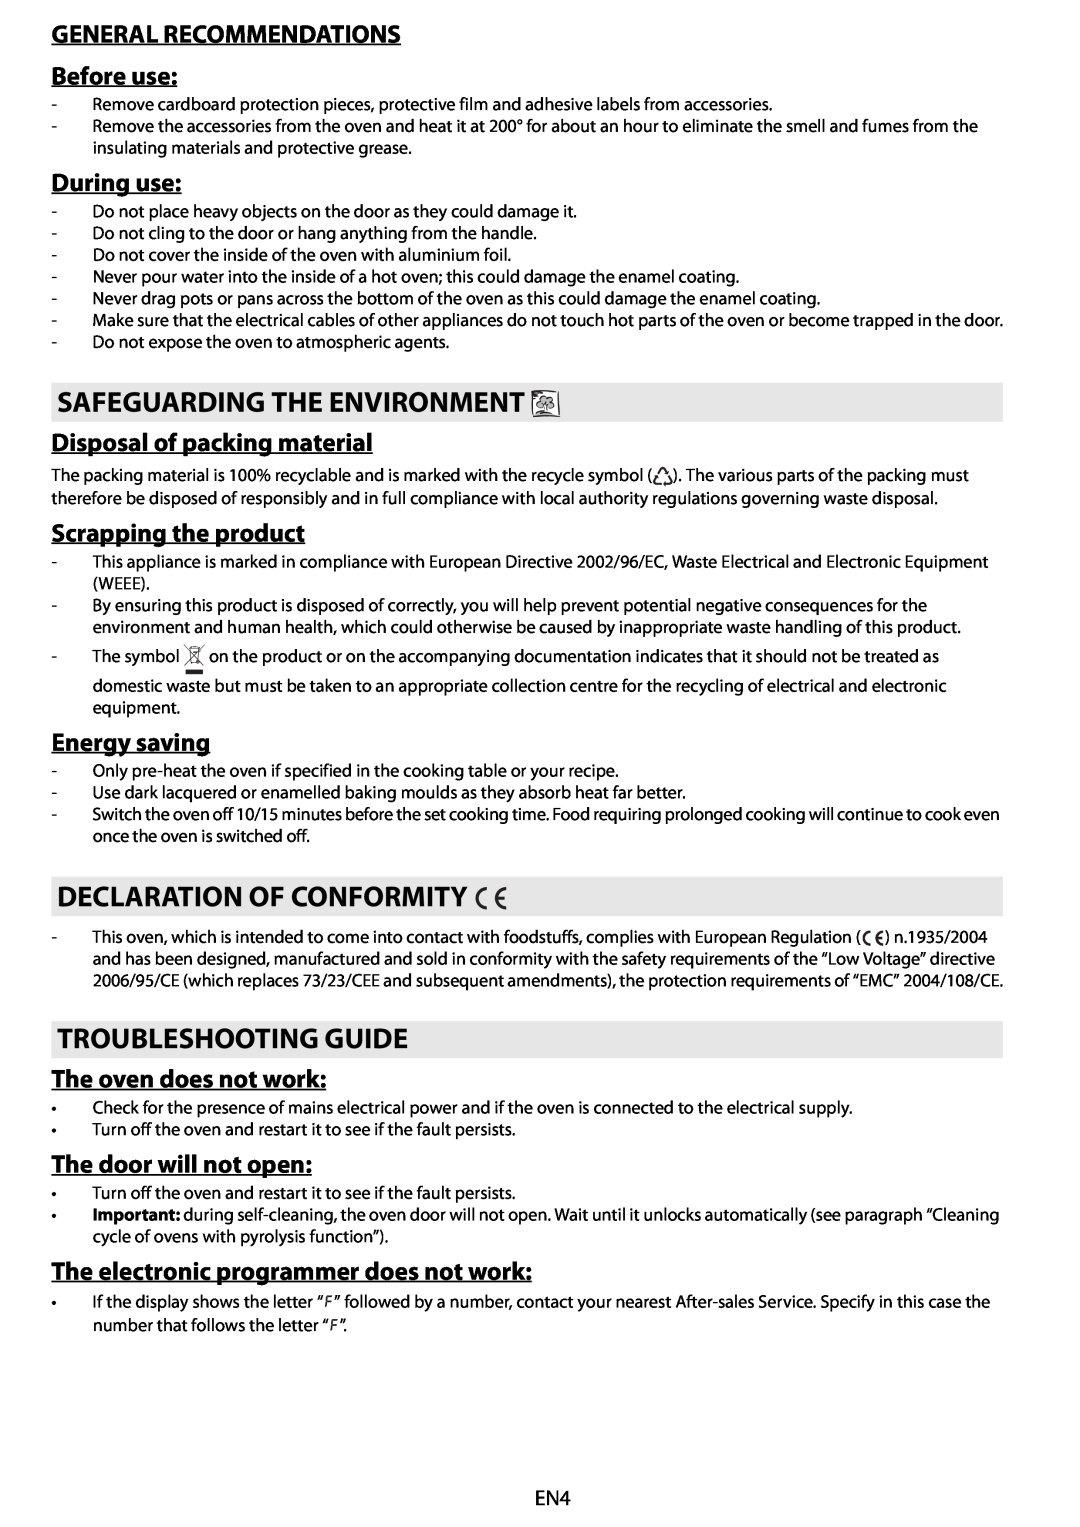 Whirlpool AKZ 561 manual Safeguarding The Environment, Declaration Of Conformity, Troubleshooting Guide, During use 